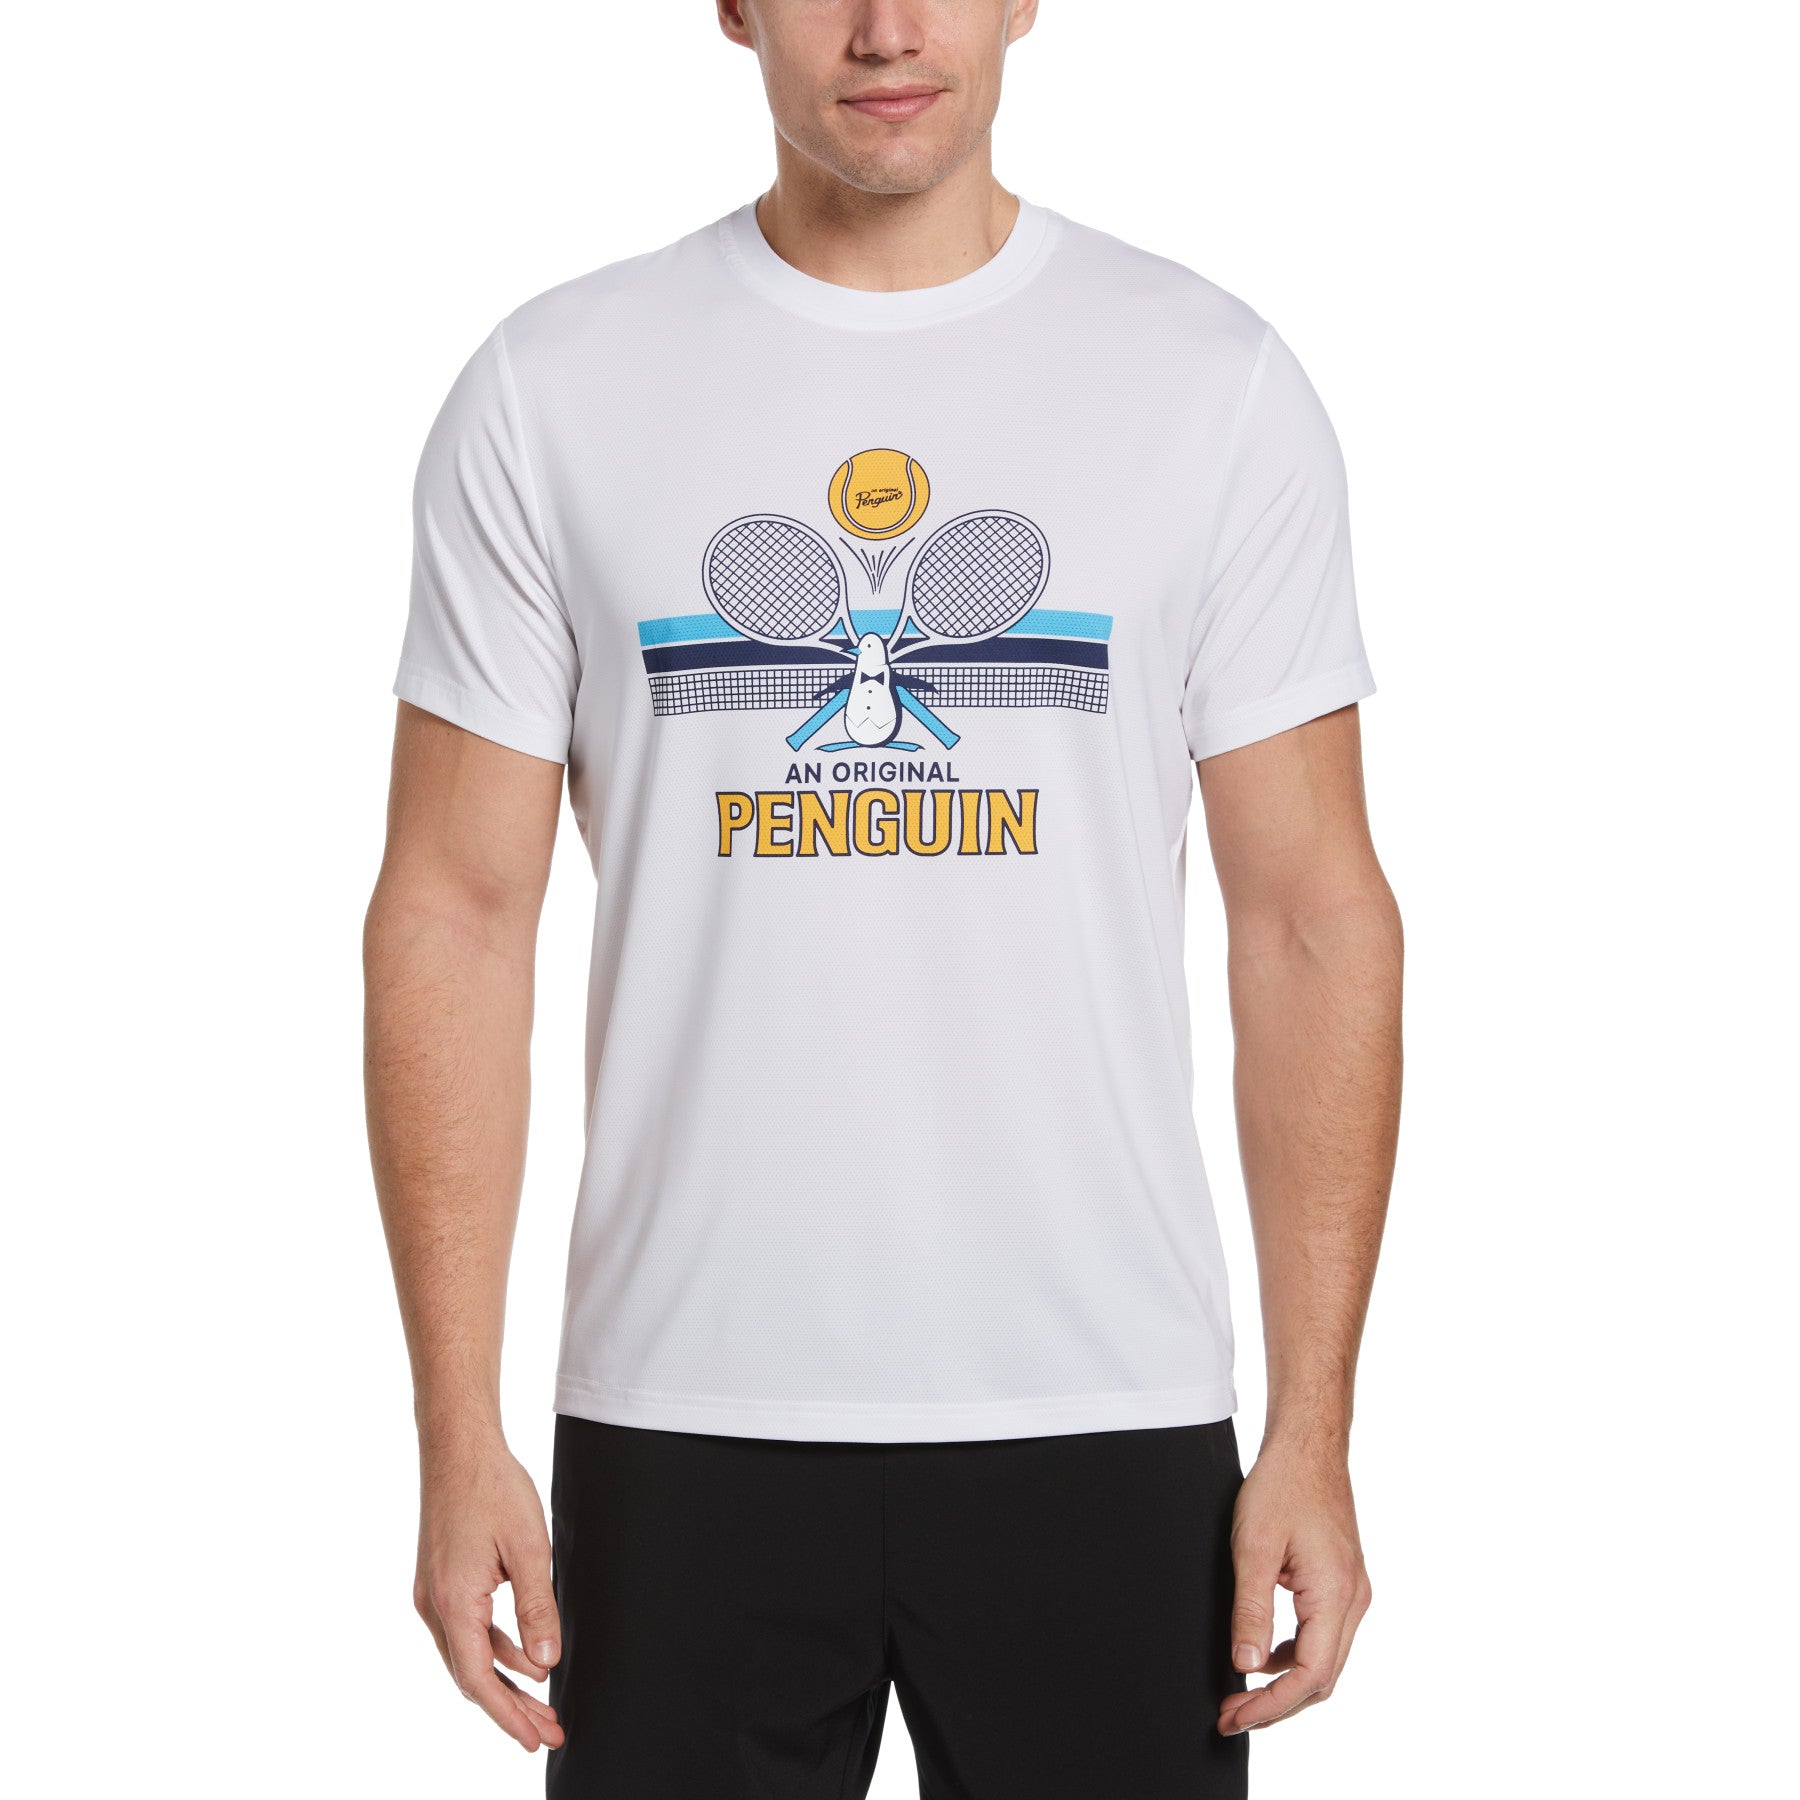 View Performance Novelty Graphic Tennis TShirt In Bright White information